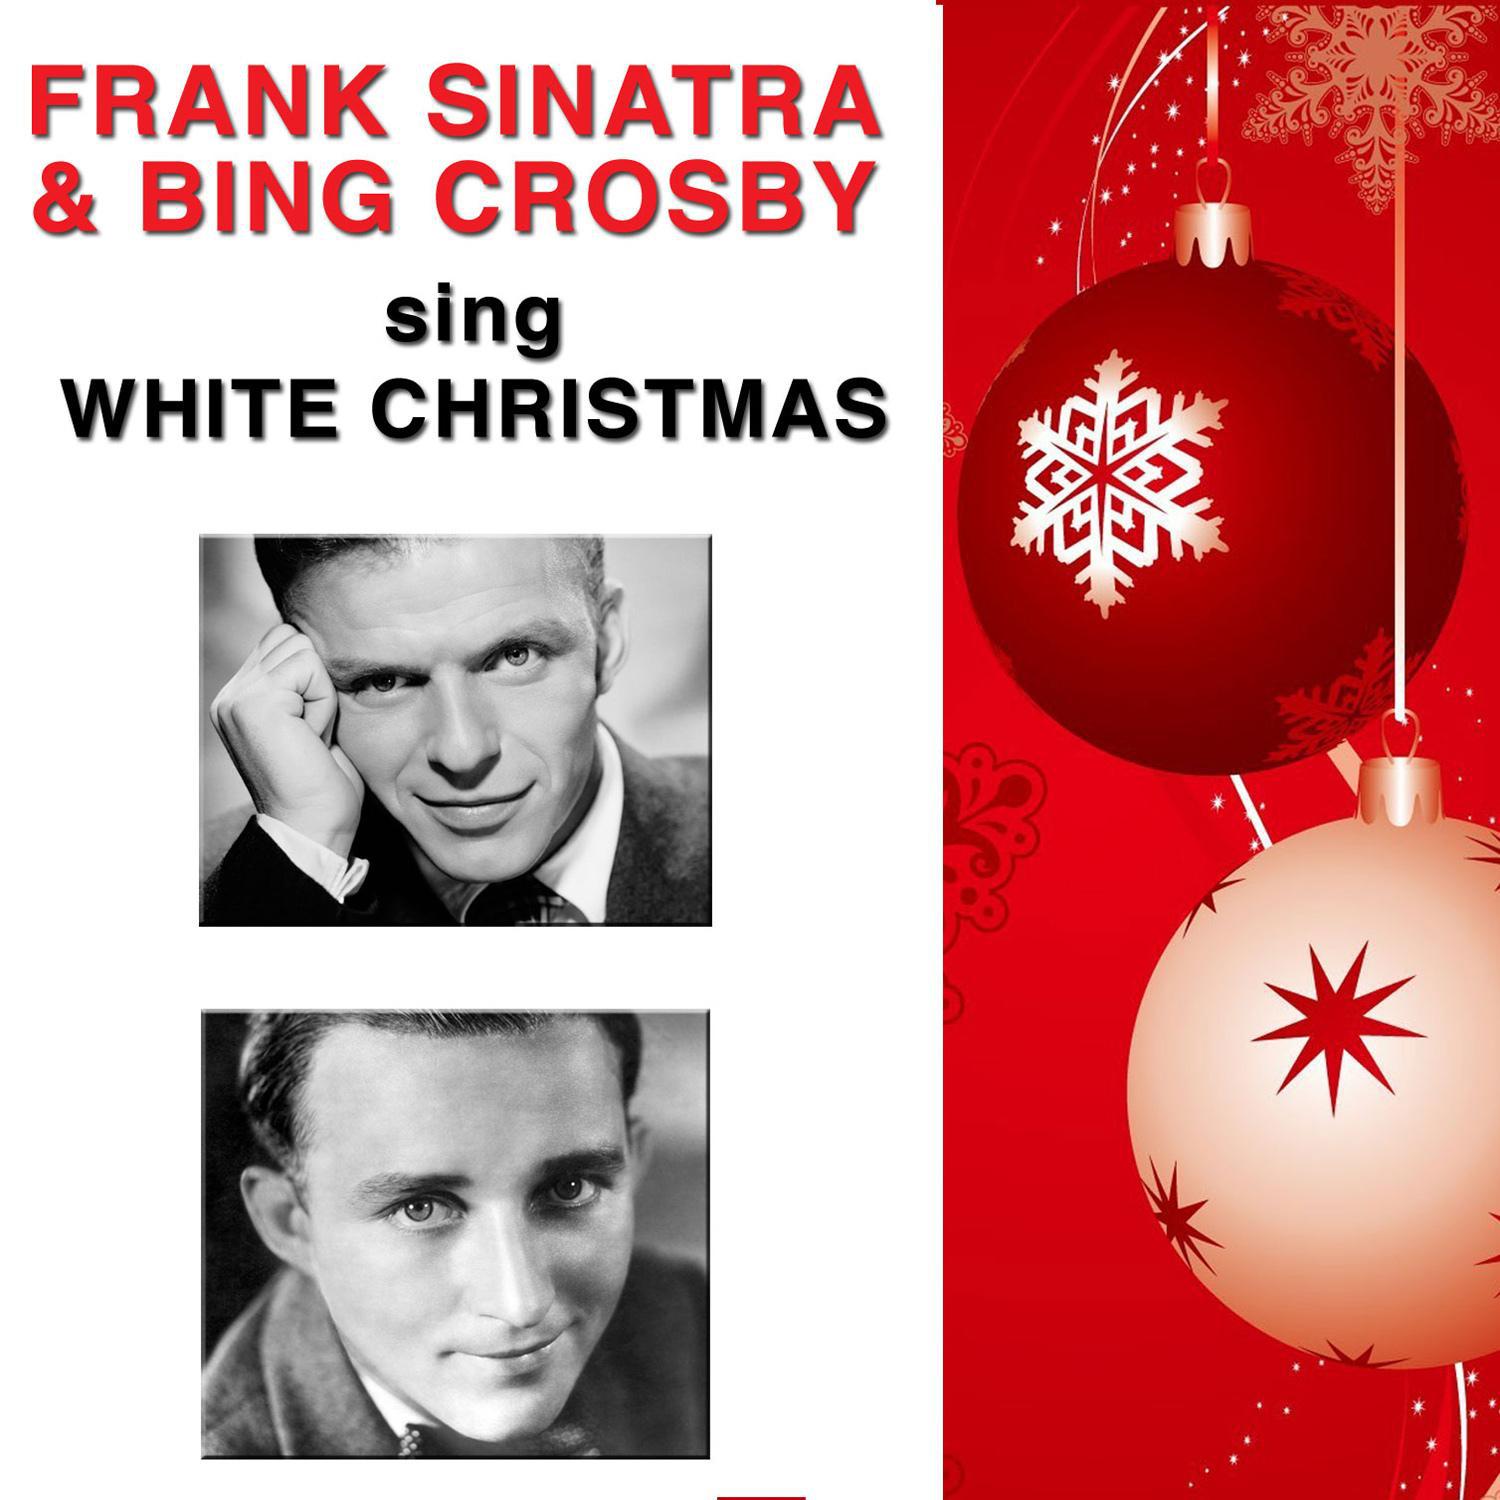 Frank Sinatra and Bing Crosby Sing White Christmas